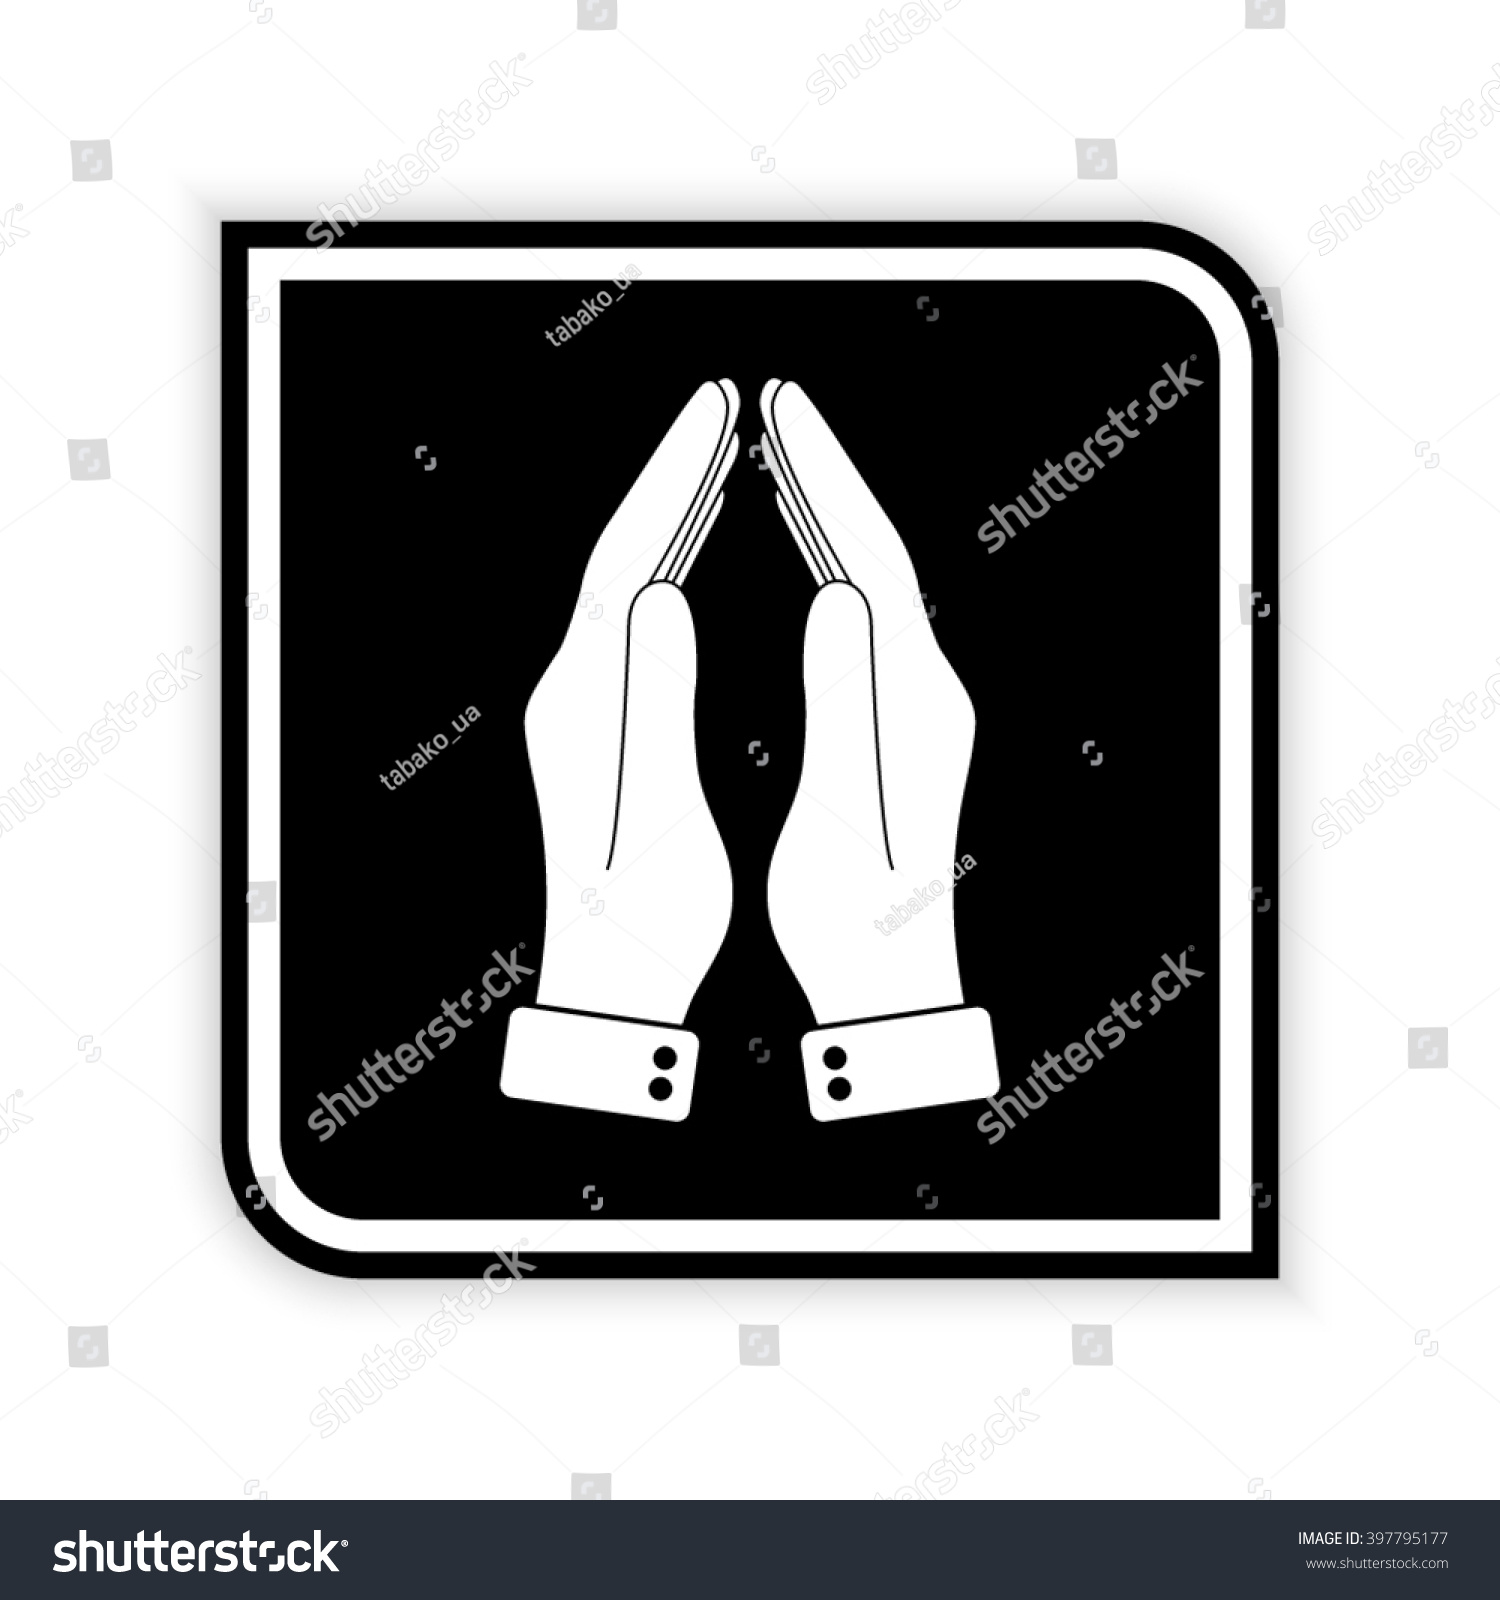 Praying Hands Black Vector Icon Stock Vector Royalty Free 397795177 Shutterstock